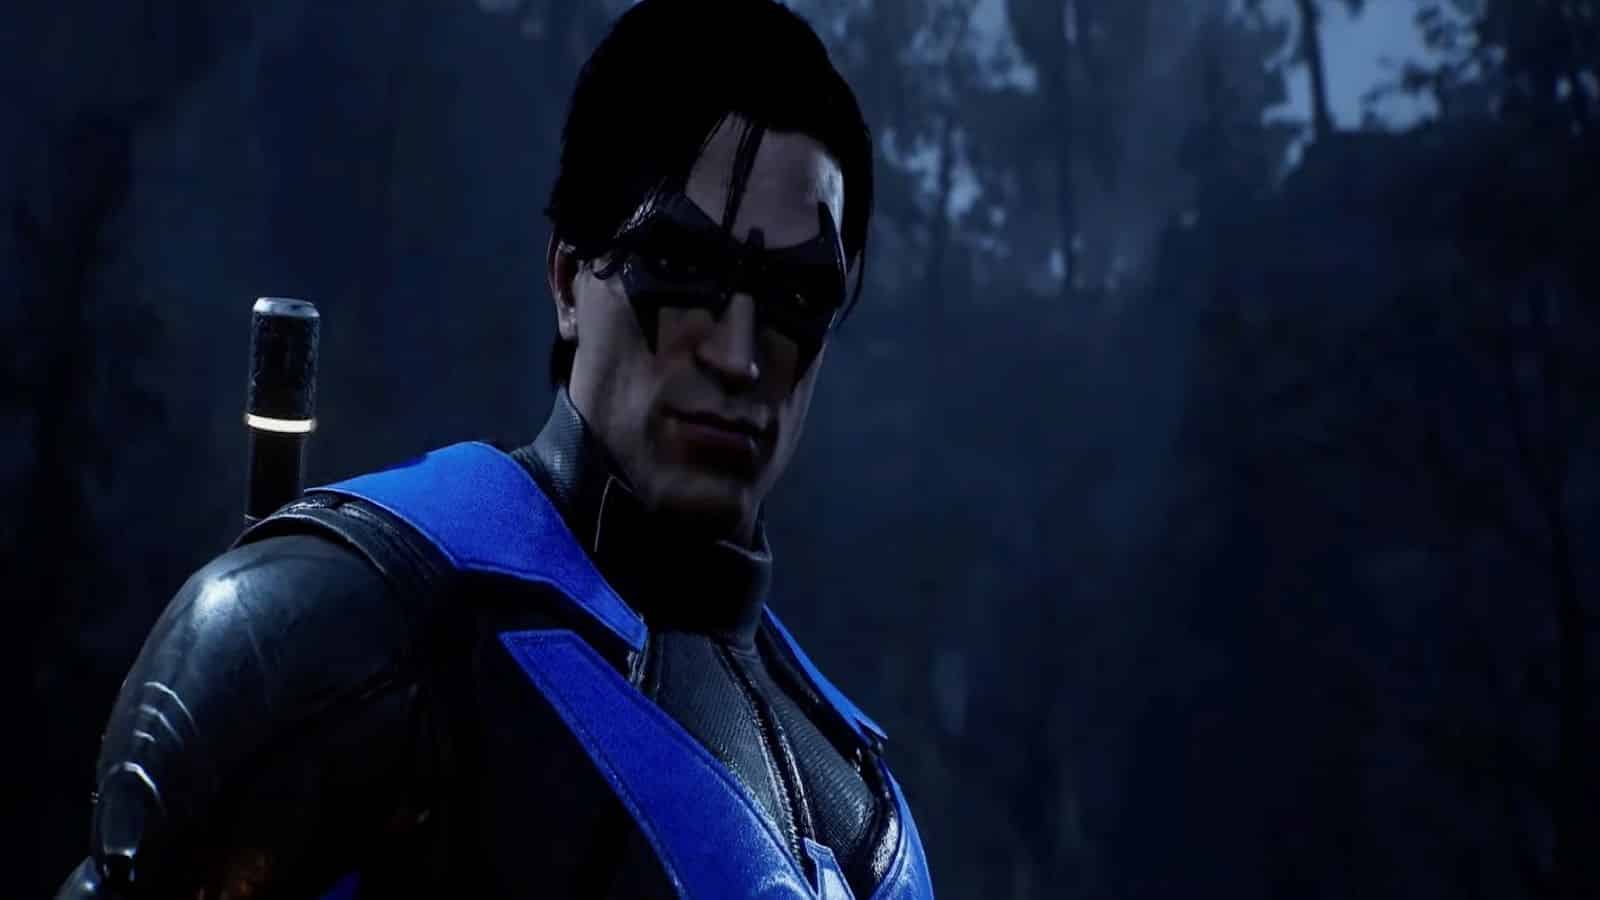 Gotham Knights Gameplay Video Showcases Nightwing and Red Hood